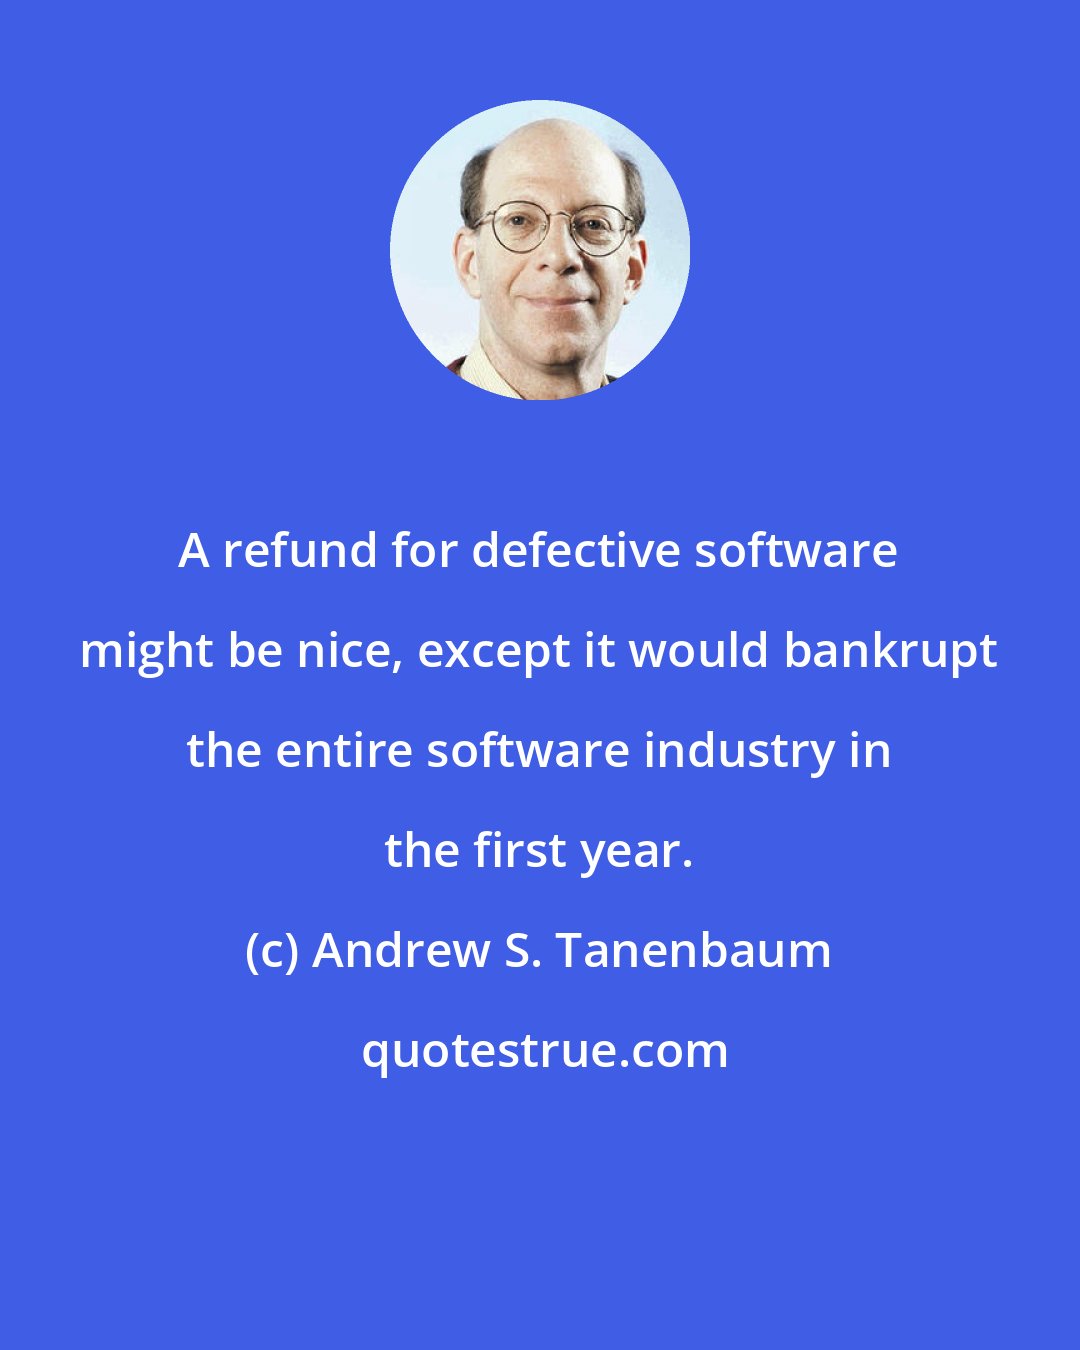 Andrew S. Tanenbaum: A refund for defective software might be nice, except it would bankrupt the entire software industry in the first year.